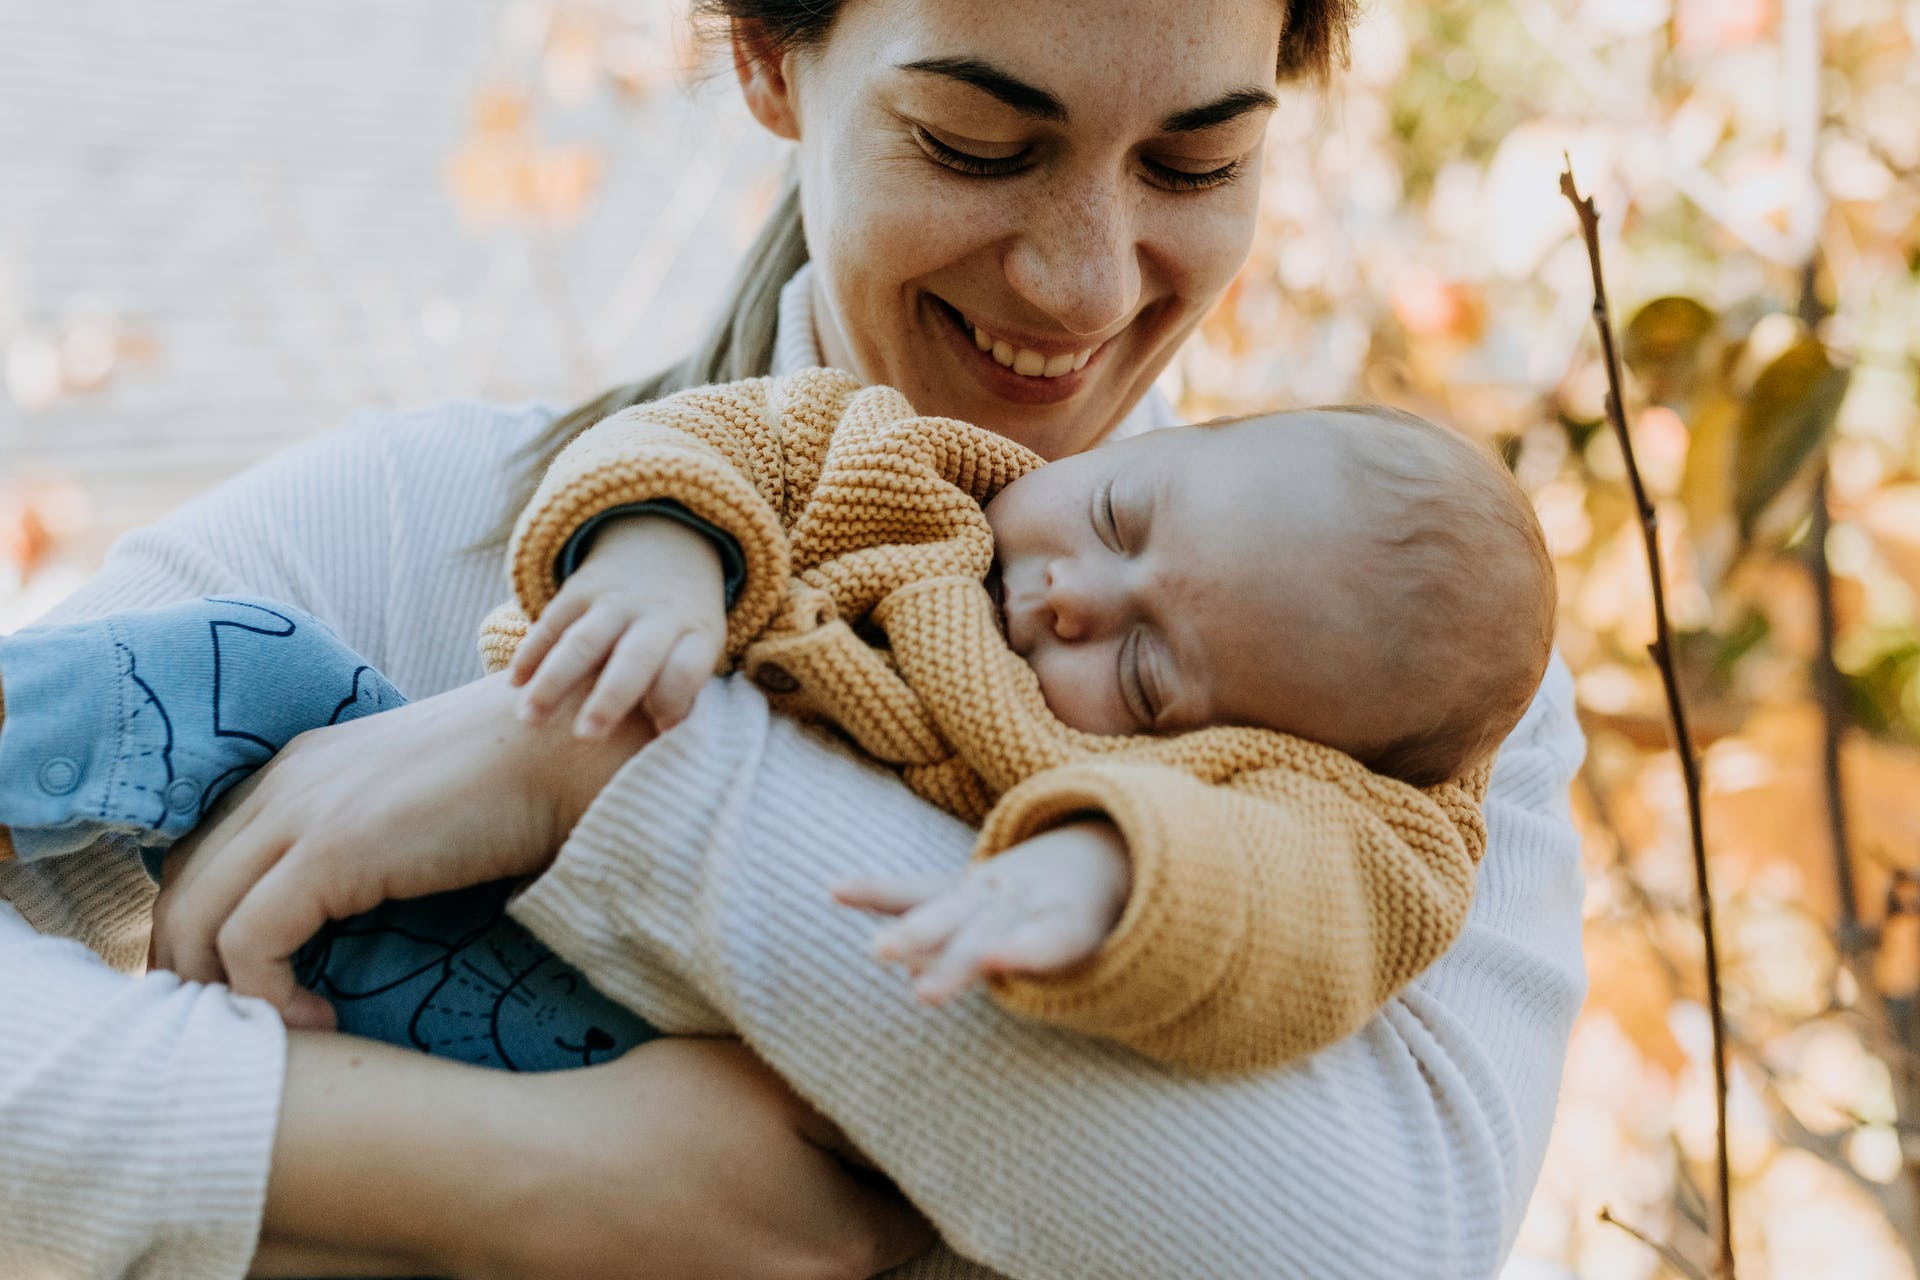 A woman smiling at her baby | Source: Pexels